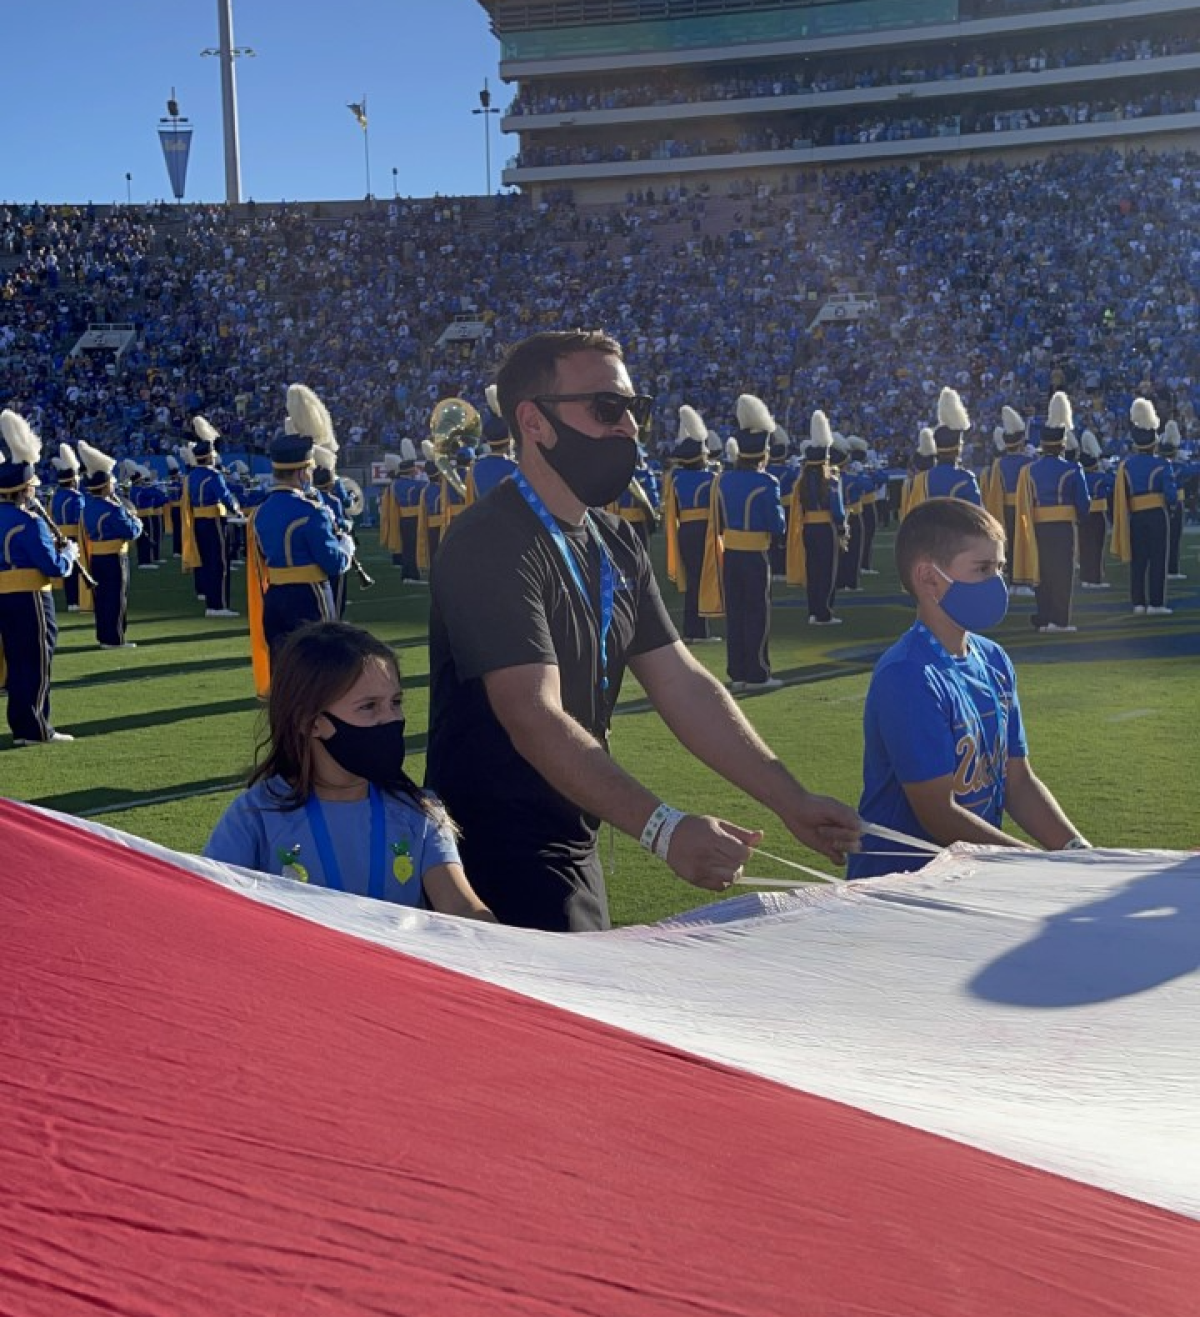 David Witzling, center, holds an American flag on the field at the Rose Bowl with his children.